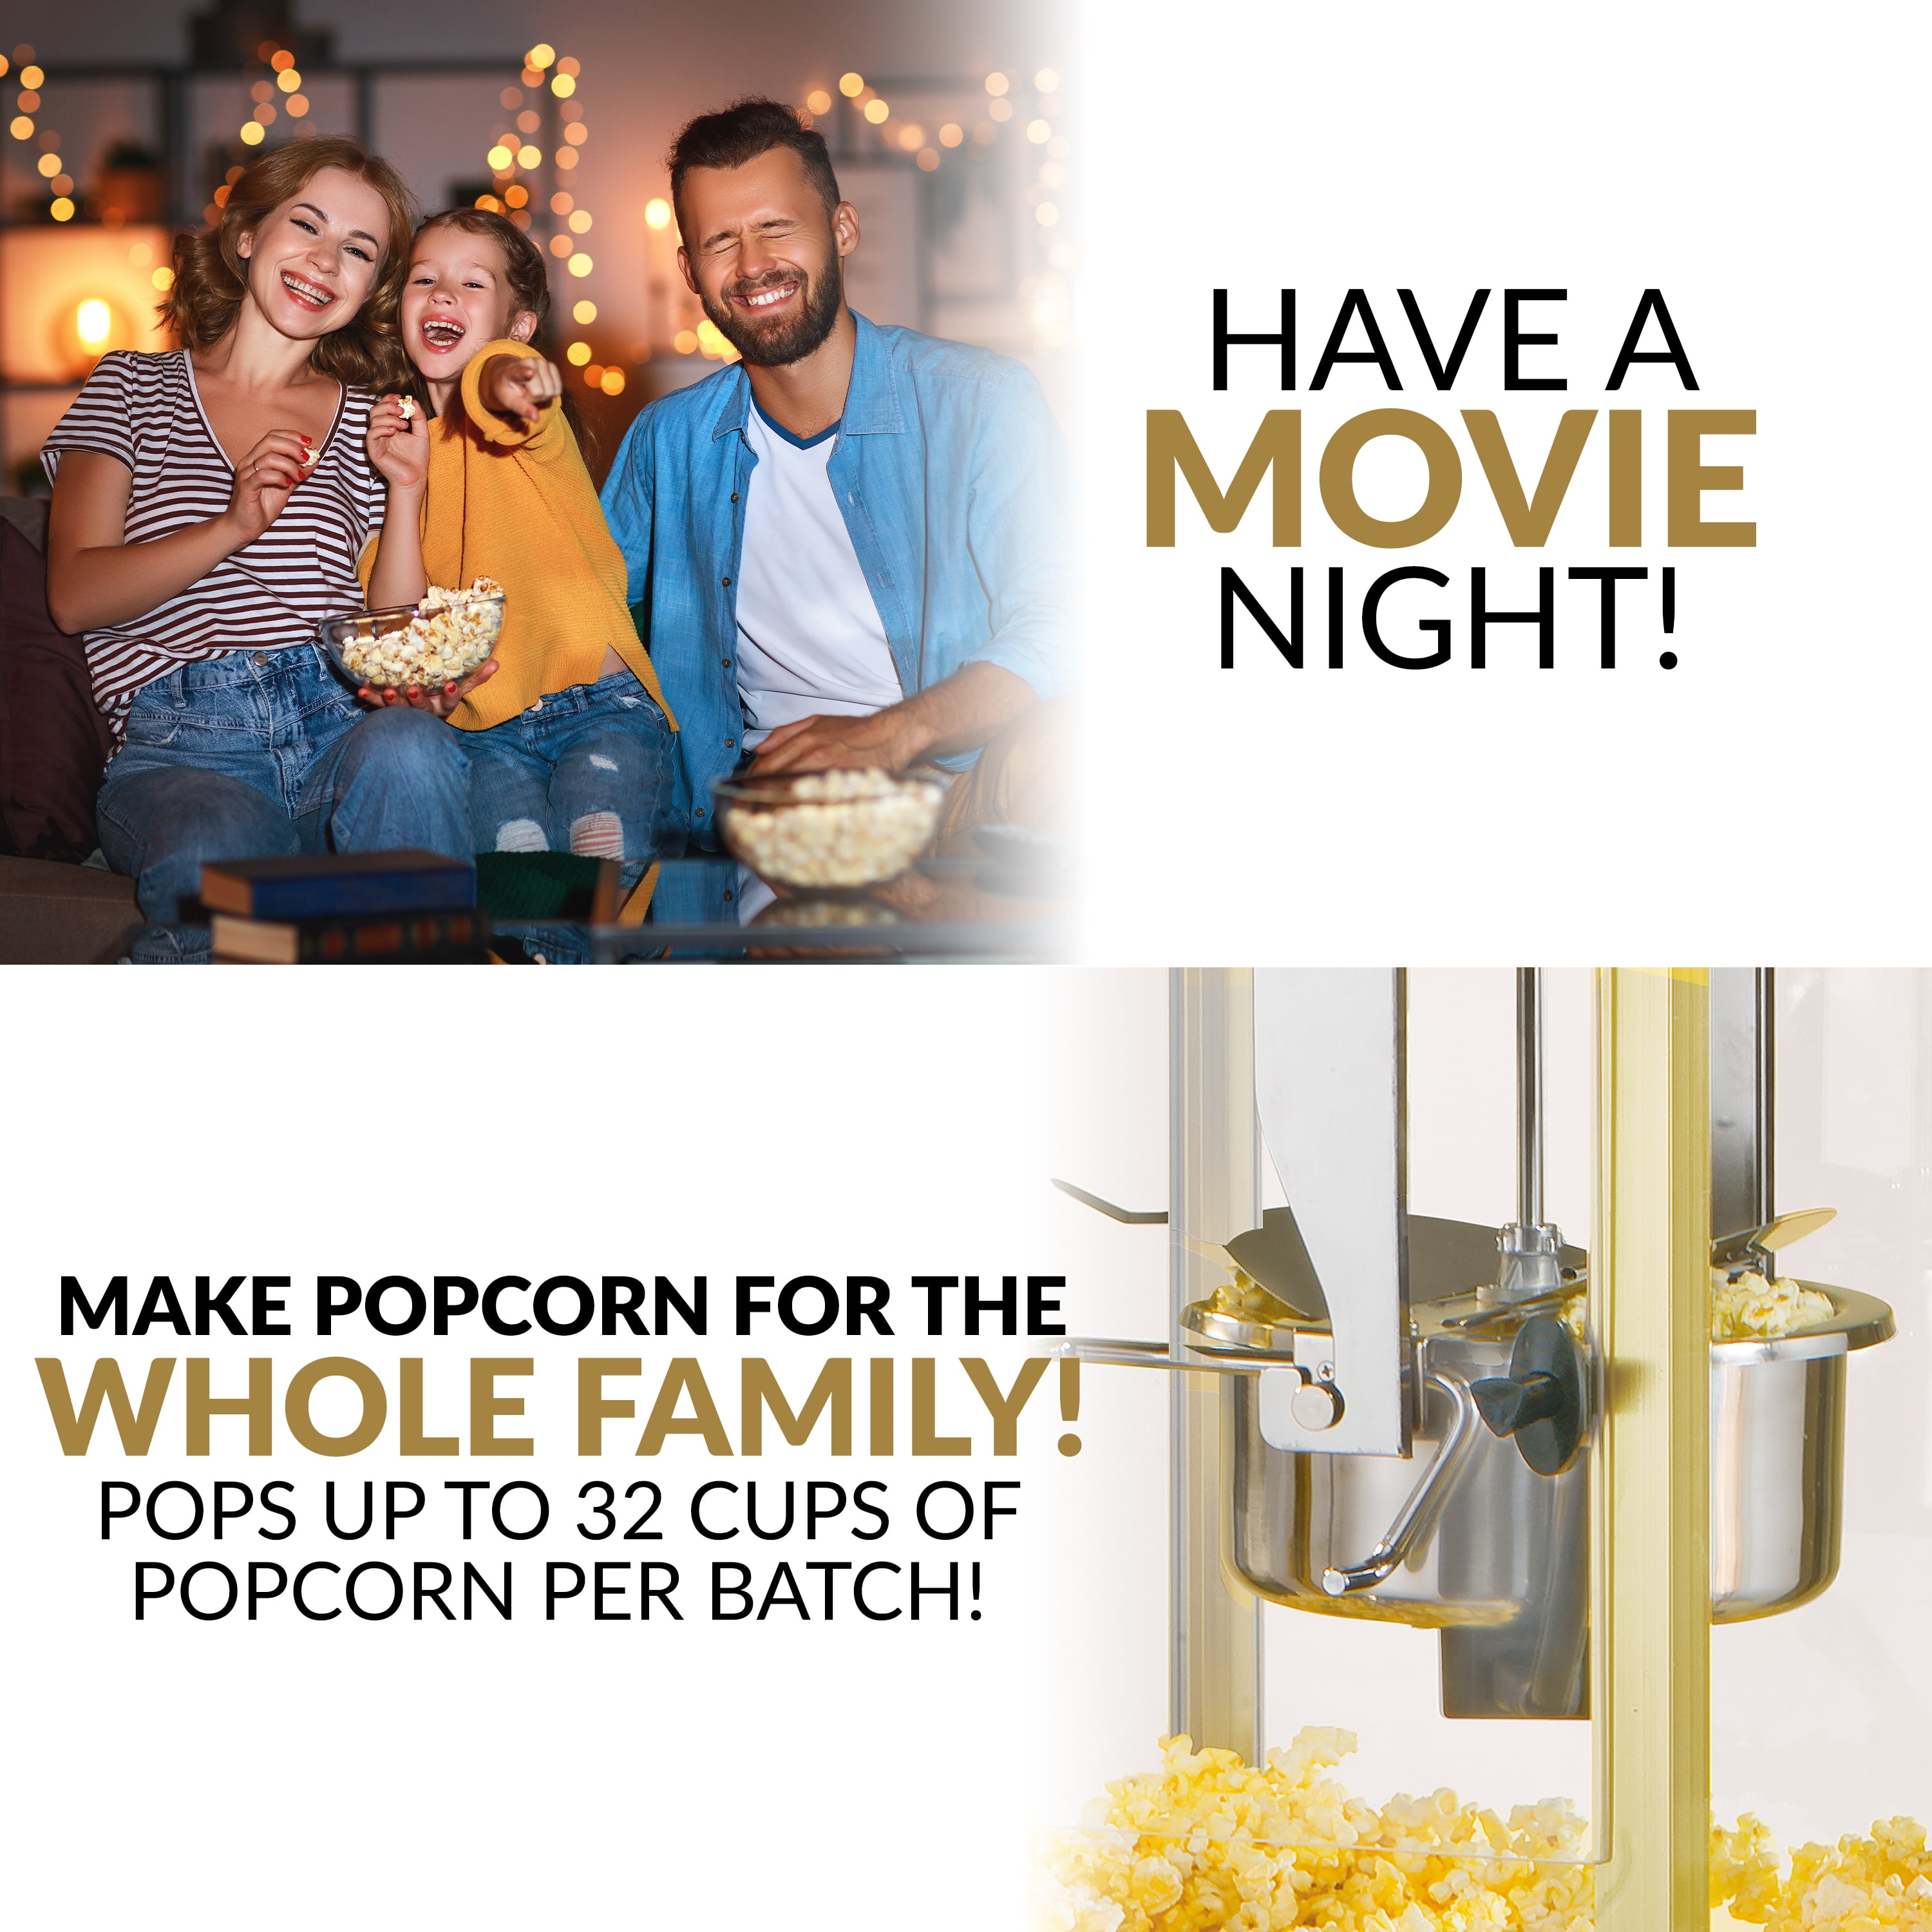 Nostalgia 53-Inch Popcorn Cart with Candy Dispenser - On Sale - Bed Bath &  Beyond - 38457395